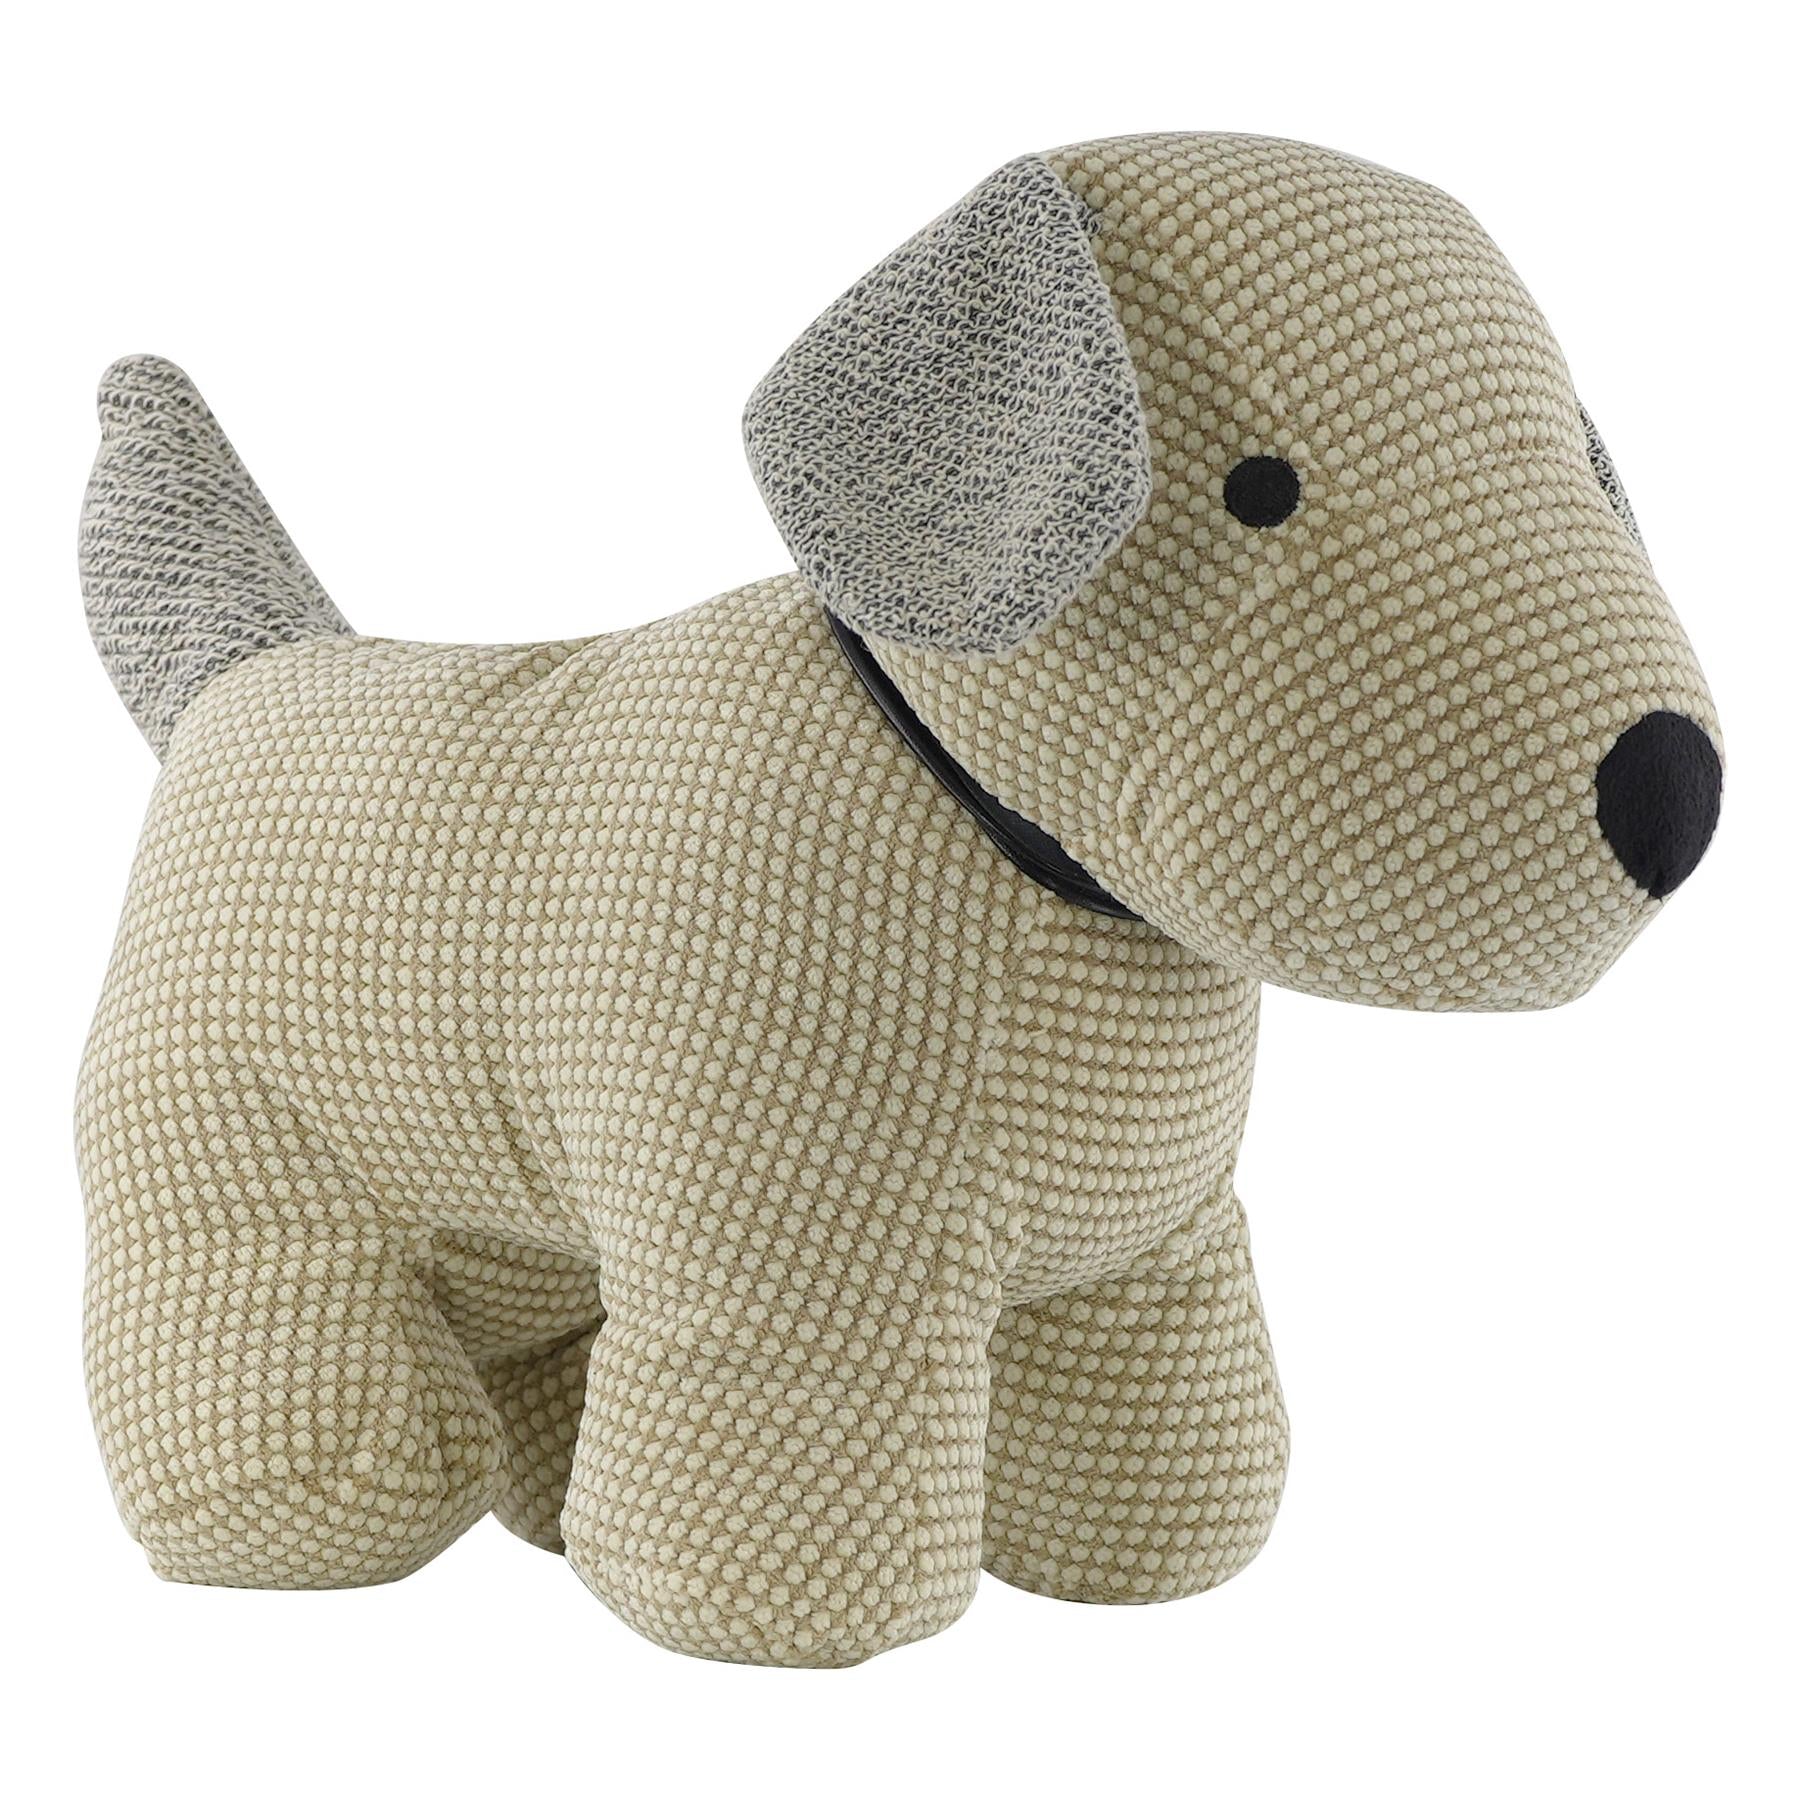 Dog Design Heavy Fabric Door Stopper by Geezy - The Magic Toy Shop